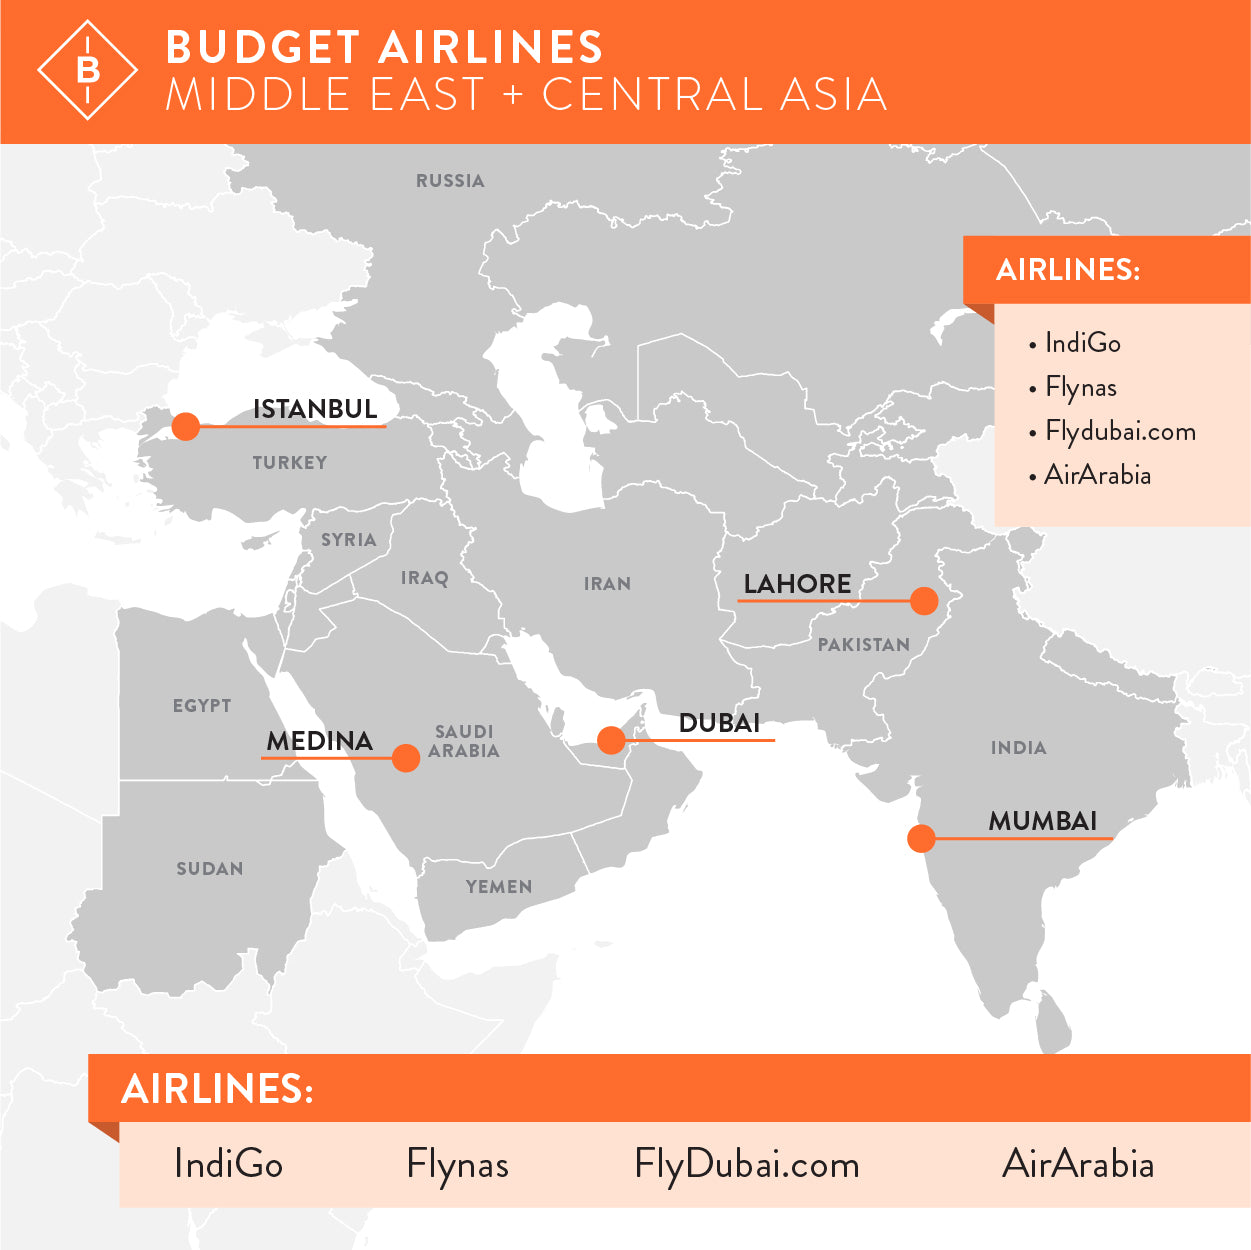 Options for low cost carriers in the Middle East & Central Asia.